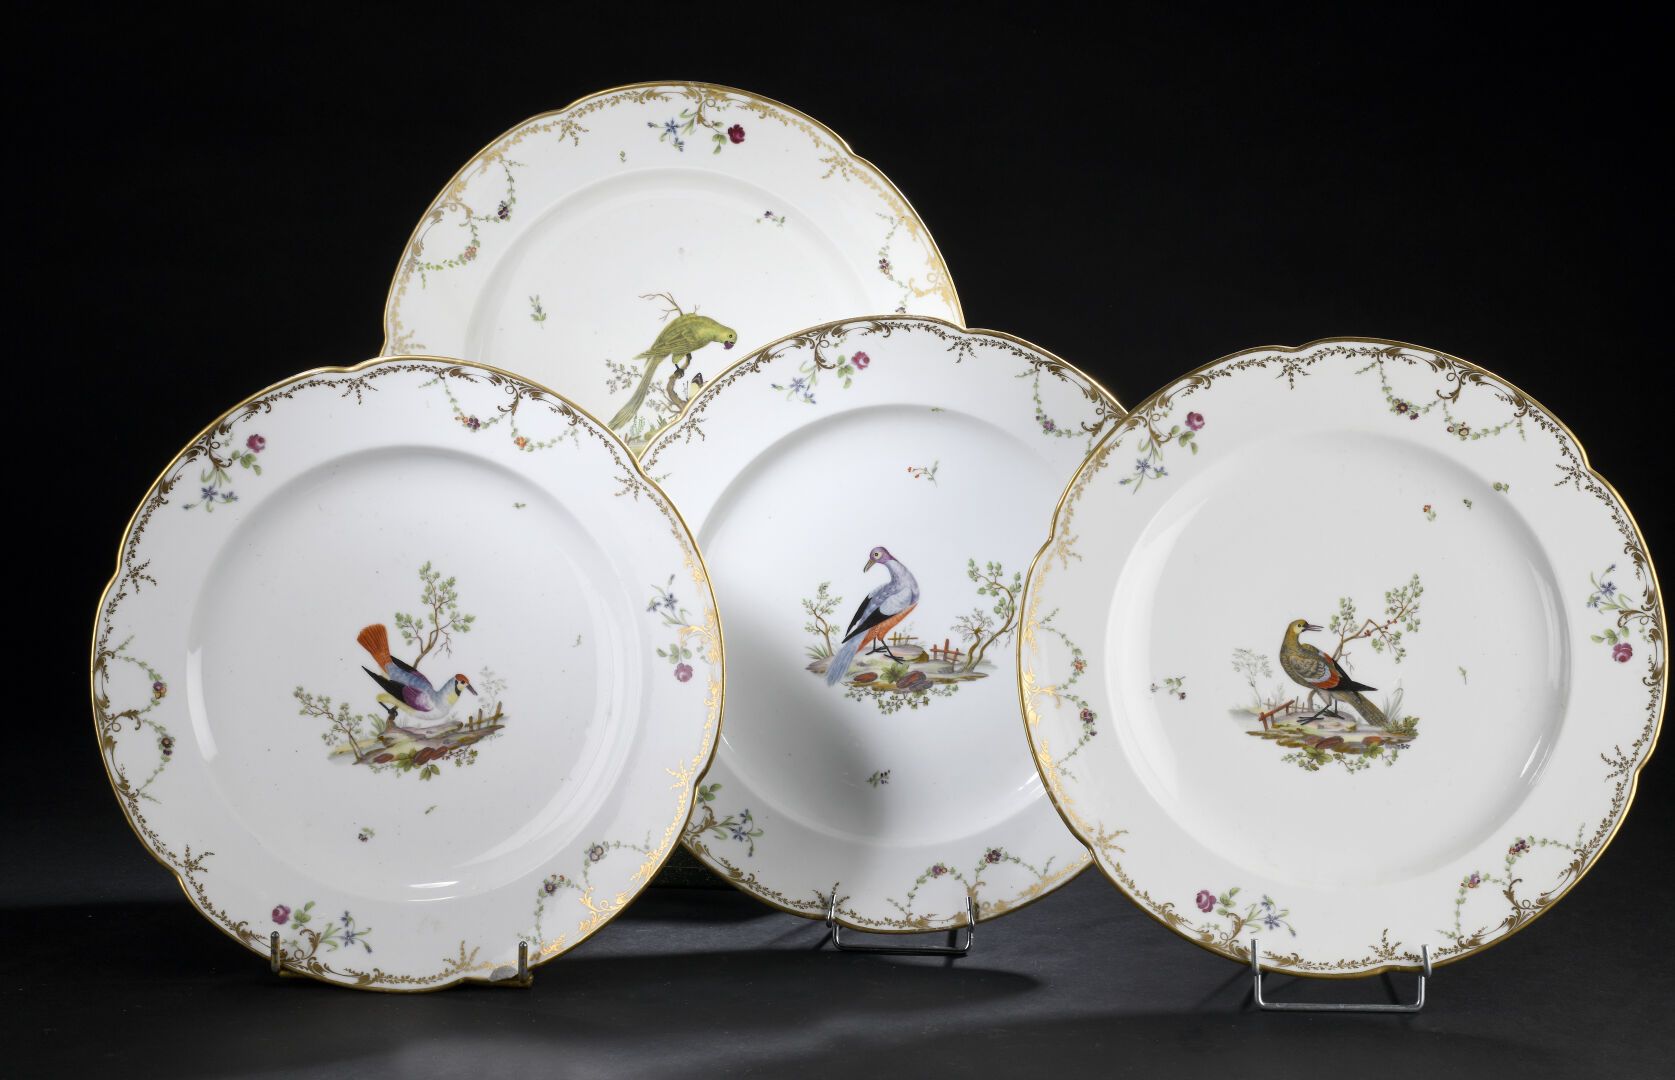 Null PARIS, 18th century
Four round dishes with contoured edges in porcelain wit&hellip;